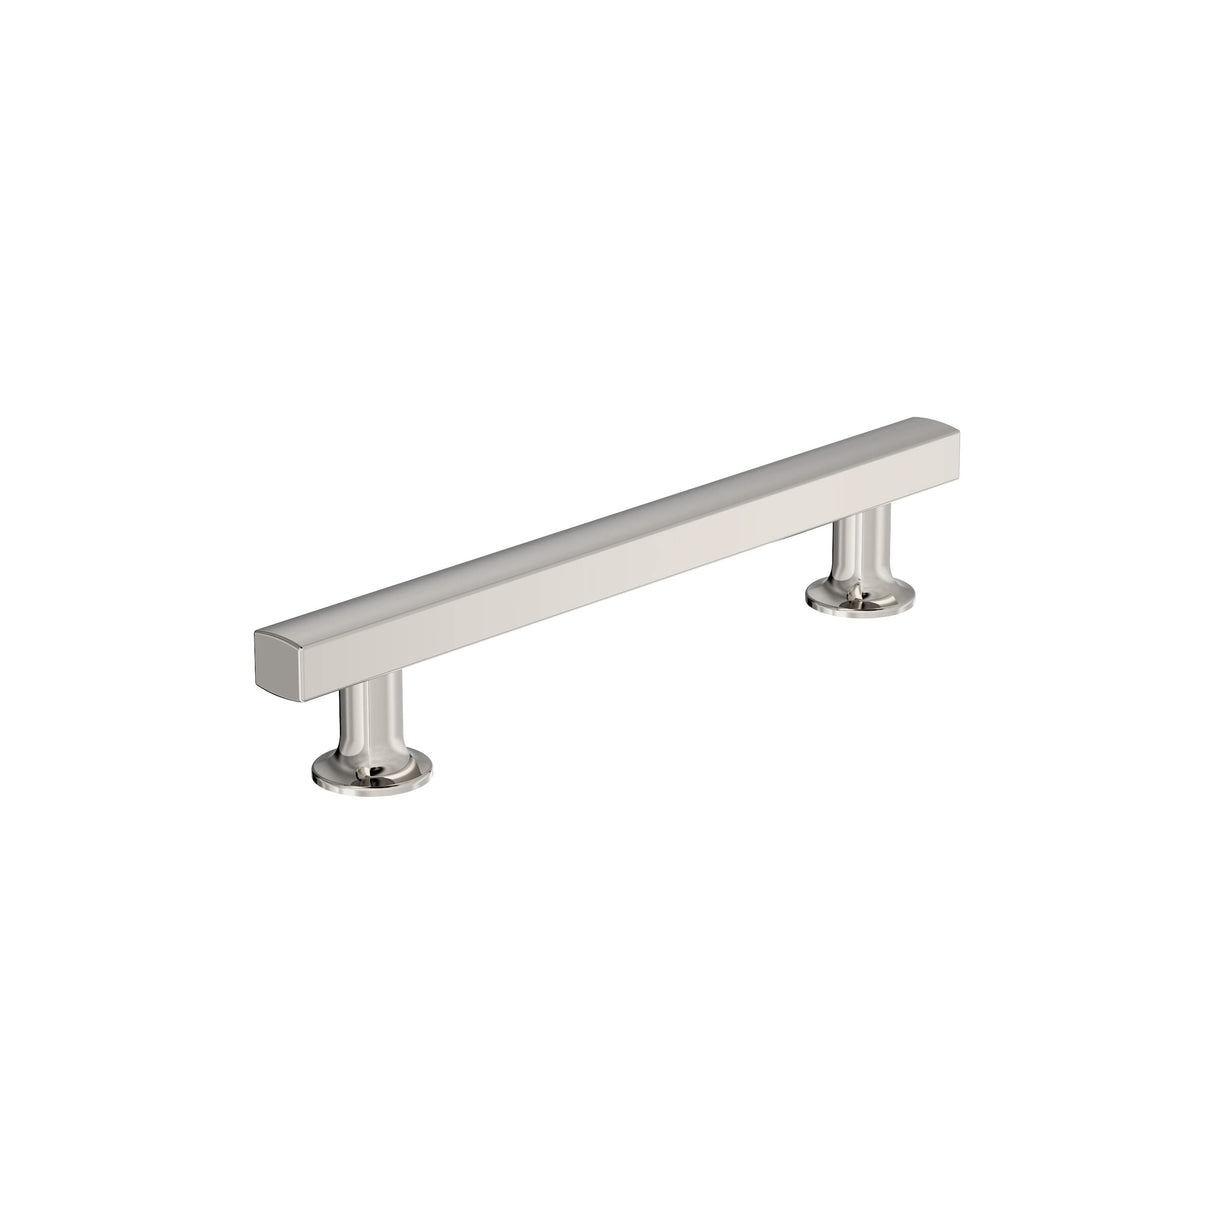 Amerock Corp BP37105PN Everett Pull, 5-1/16 in (128 mm) Center-to-Center, Polished Nickel